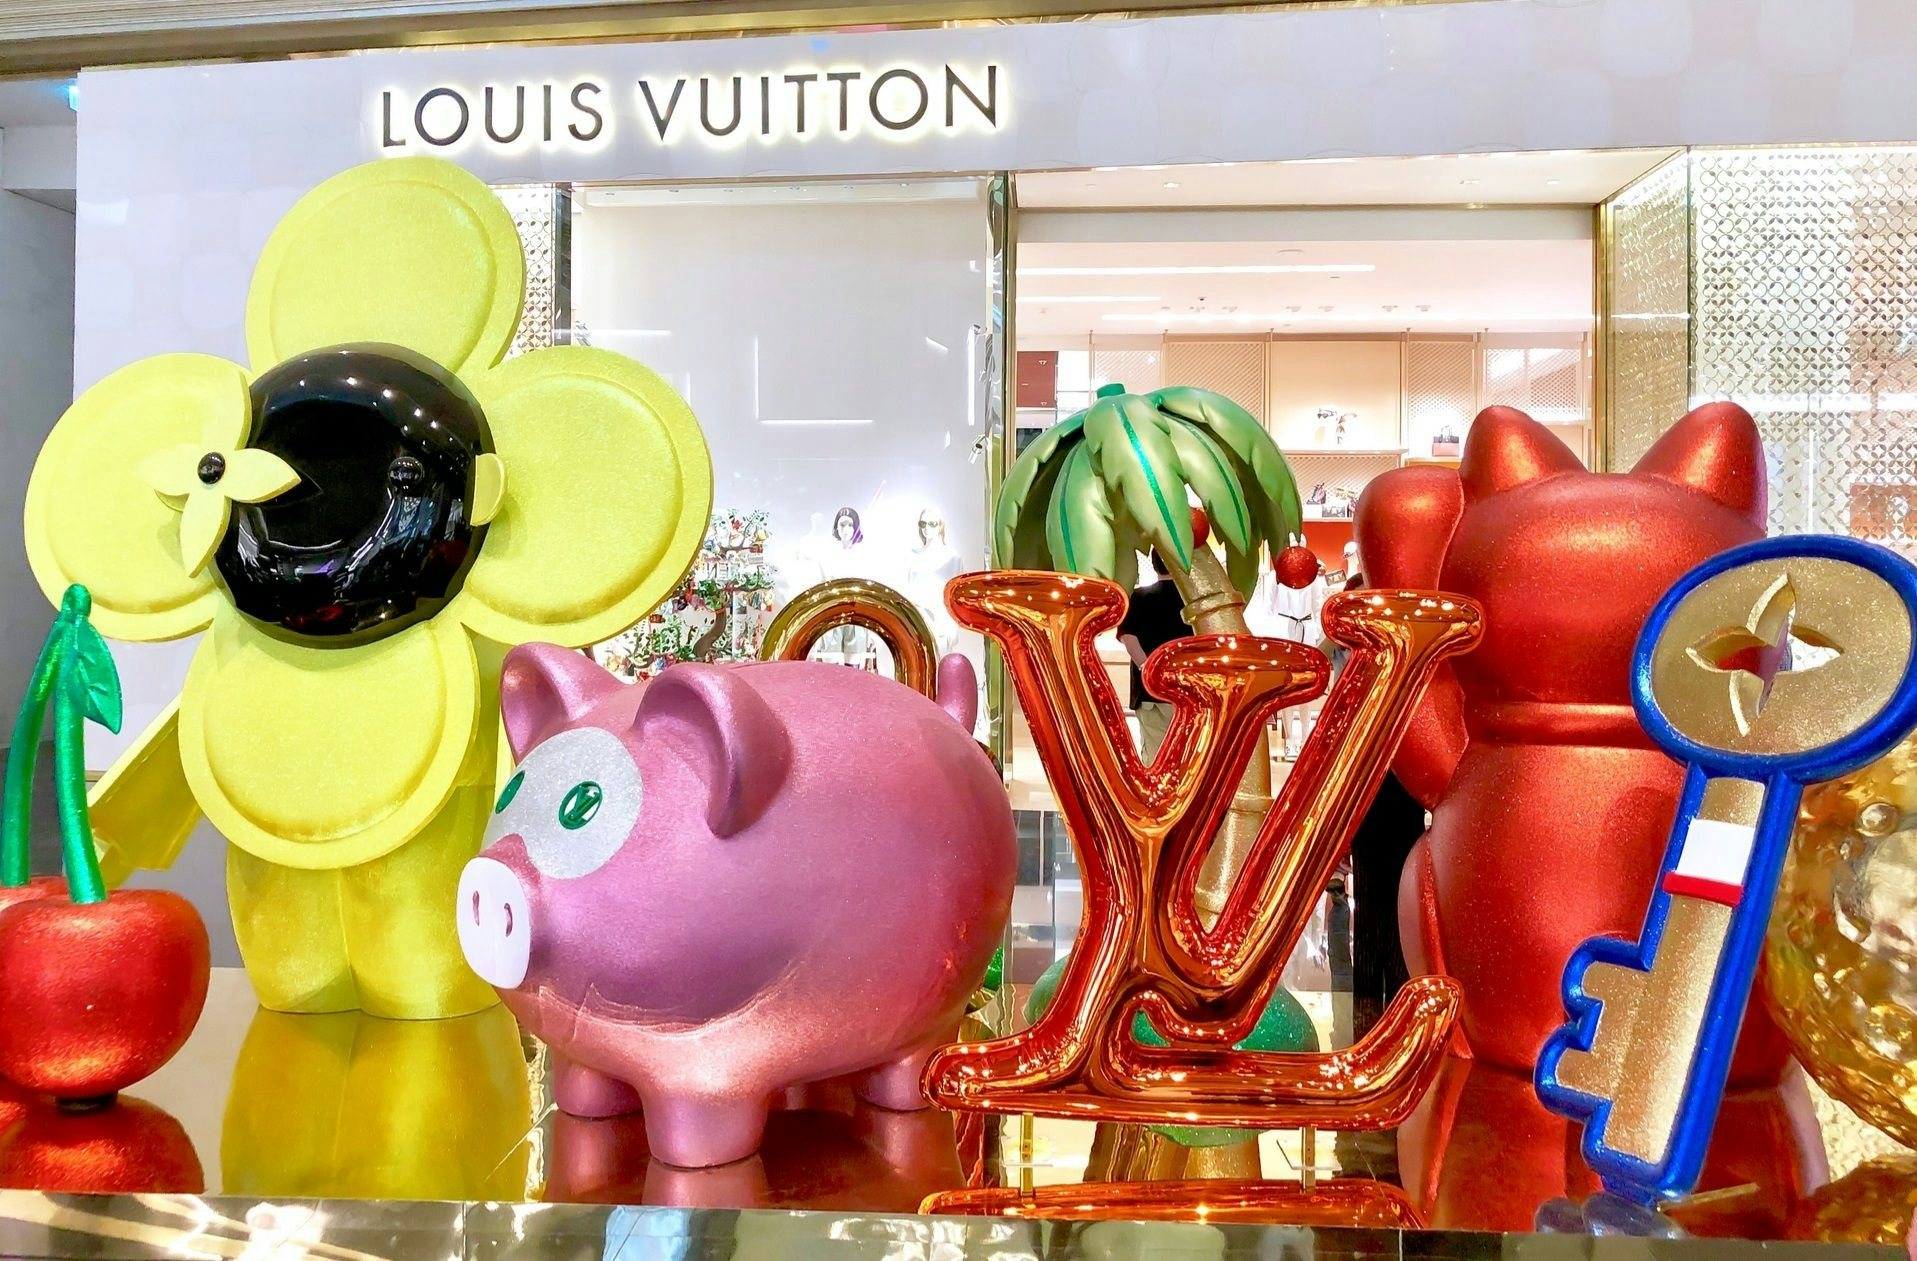  LVMH Moët Hennessy Louis Vuitton released its Q4 and full-year 2018 earnings on Jan. 29. The company was upbeat about growth, but remained cautious. Photo: Shutterstock